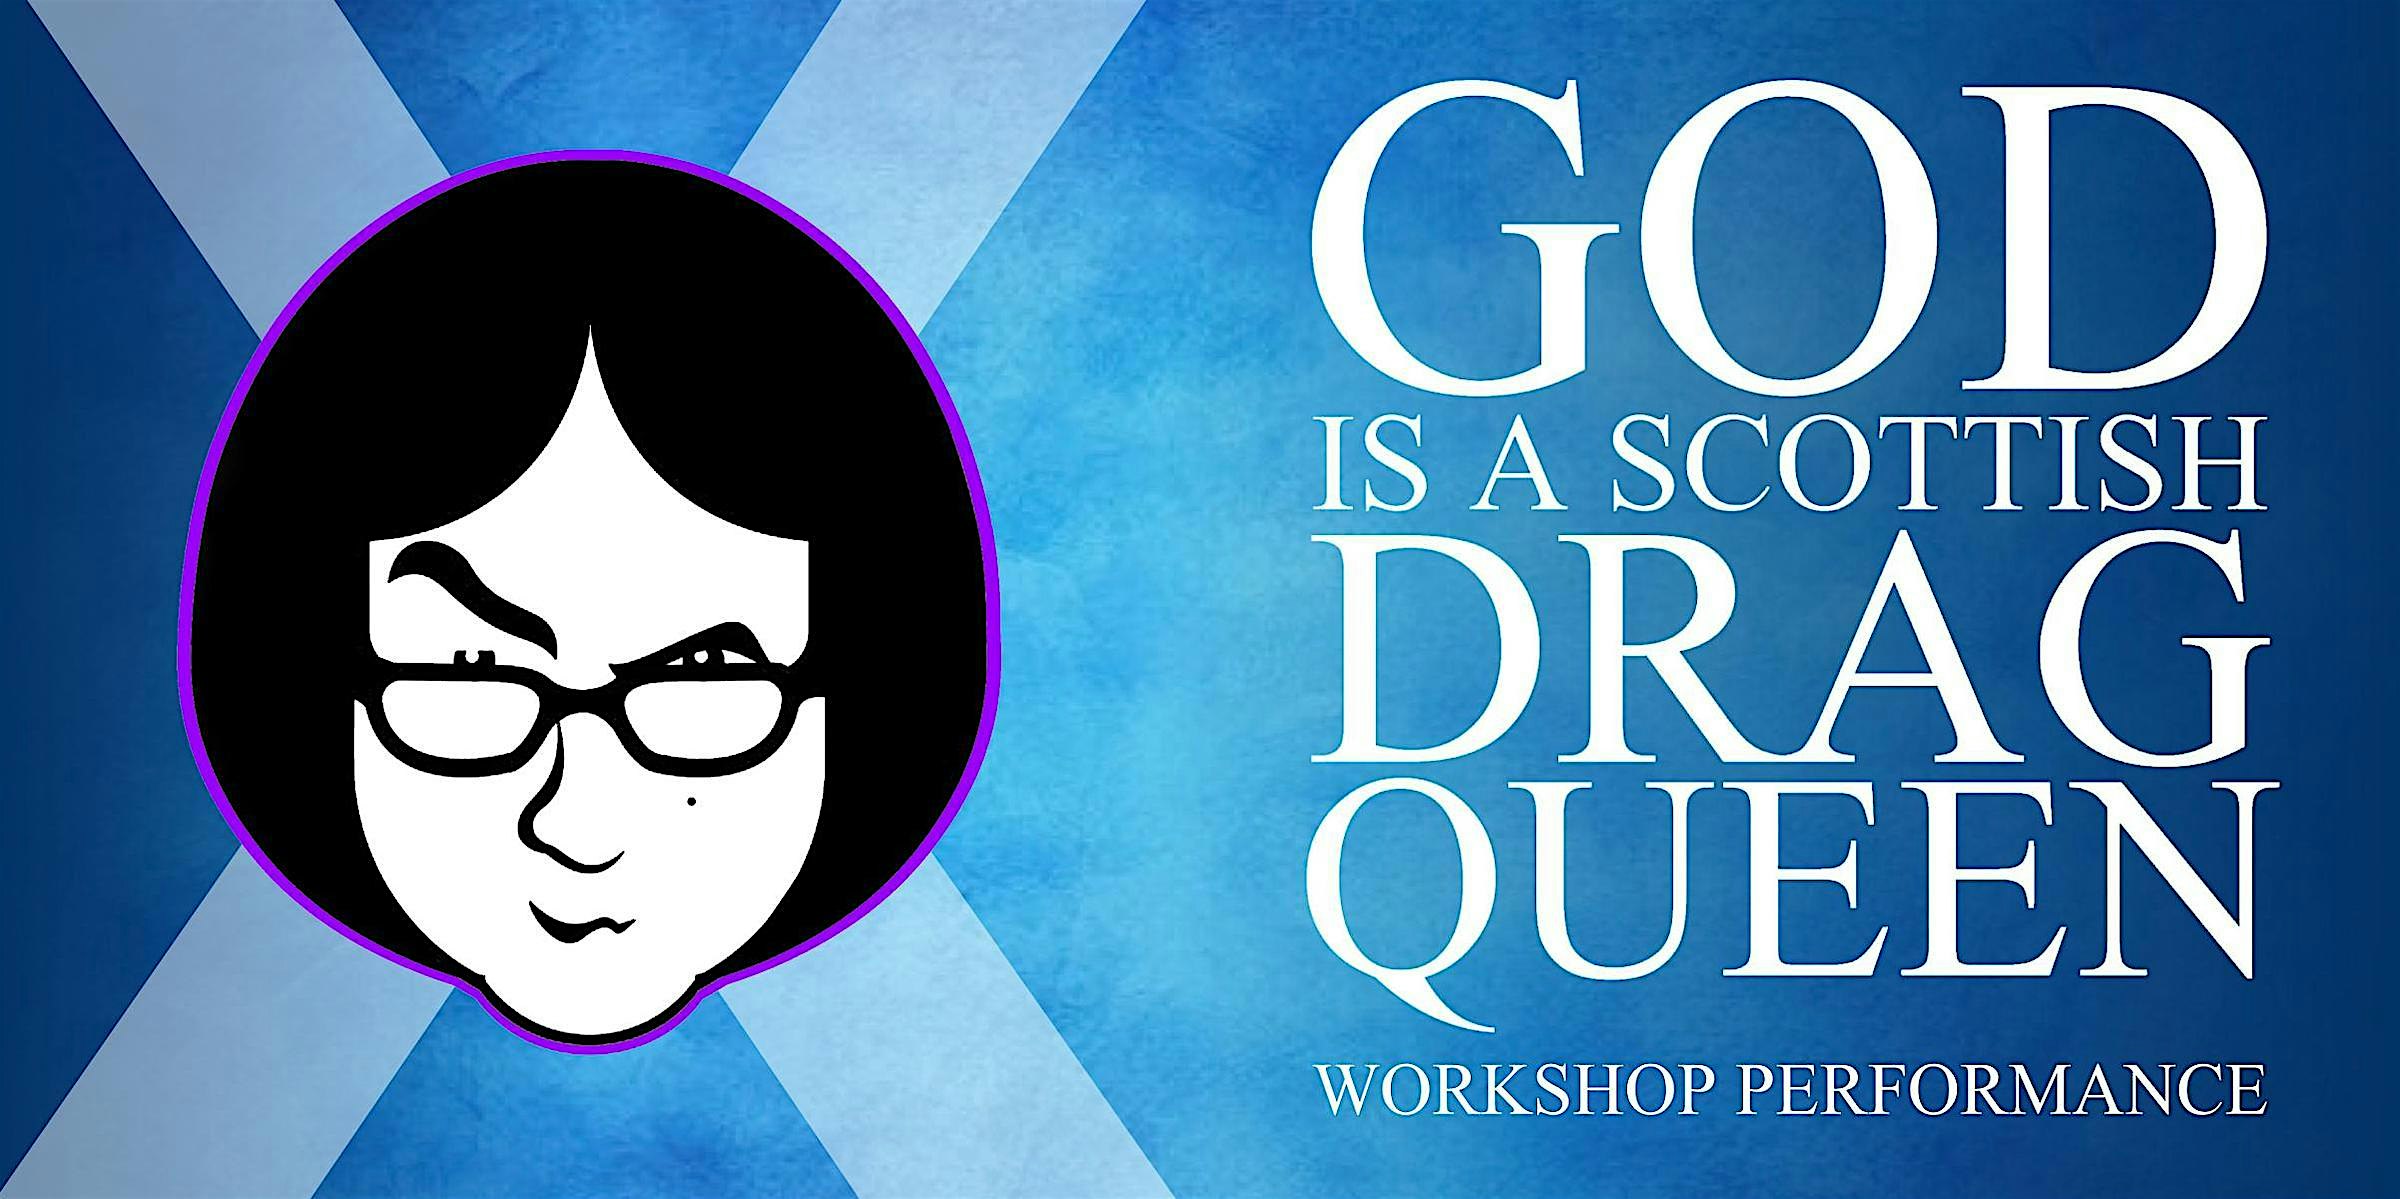 God Is A Scottish Drag Queen Workshop Performance (9PM Show)